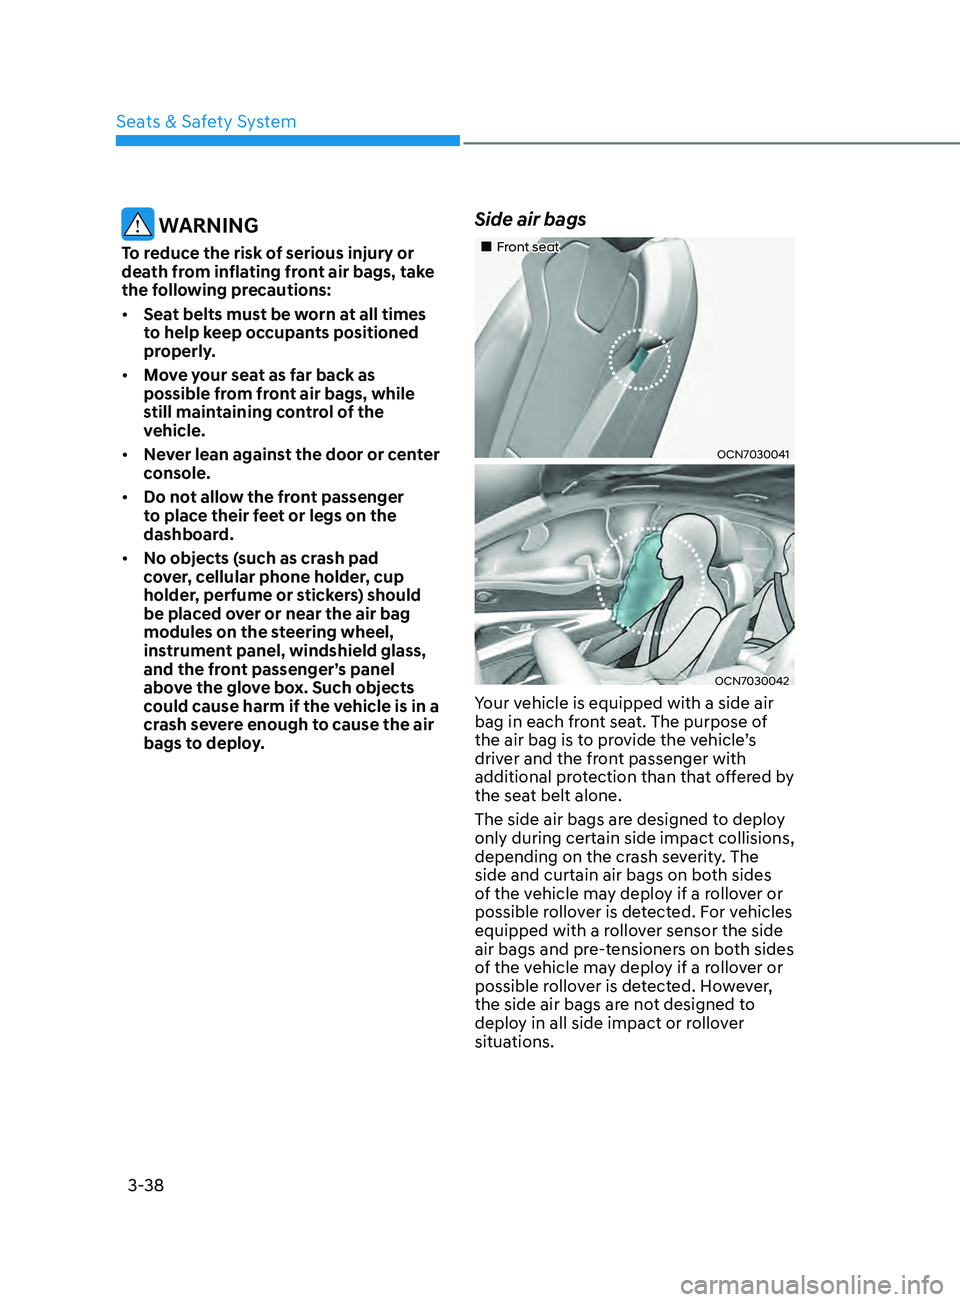 HYUNDAI ELANTRA SEL 2021  Owners Manual 3-38
 WARNING
To reduce the risk of serious injury or 
death from inflating front air bags, take 
the following precautions:
•	Seat belts must be worn at all times 
to help keep occupants positioned